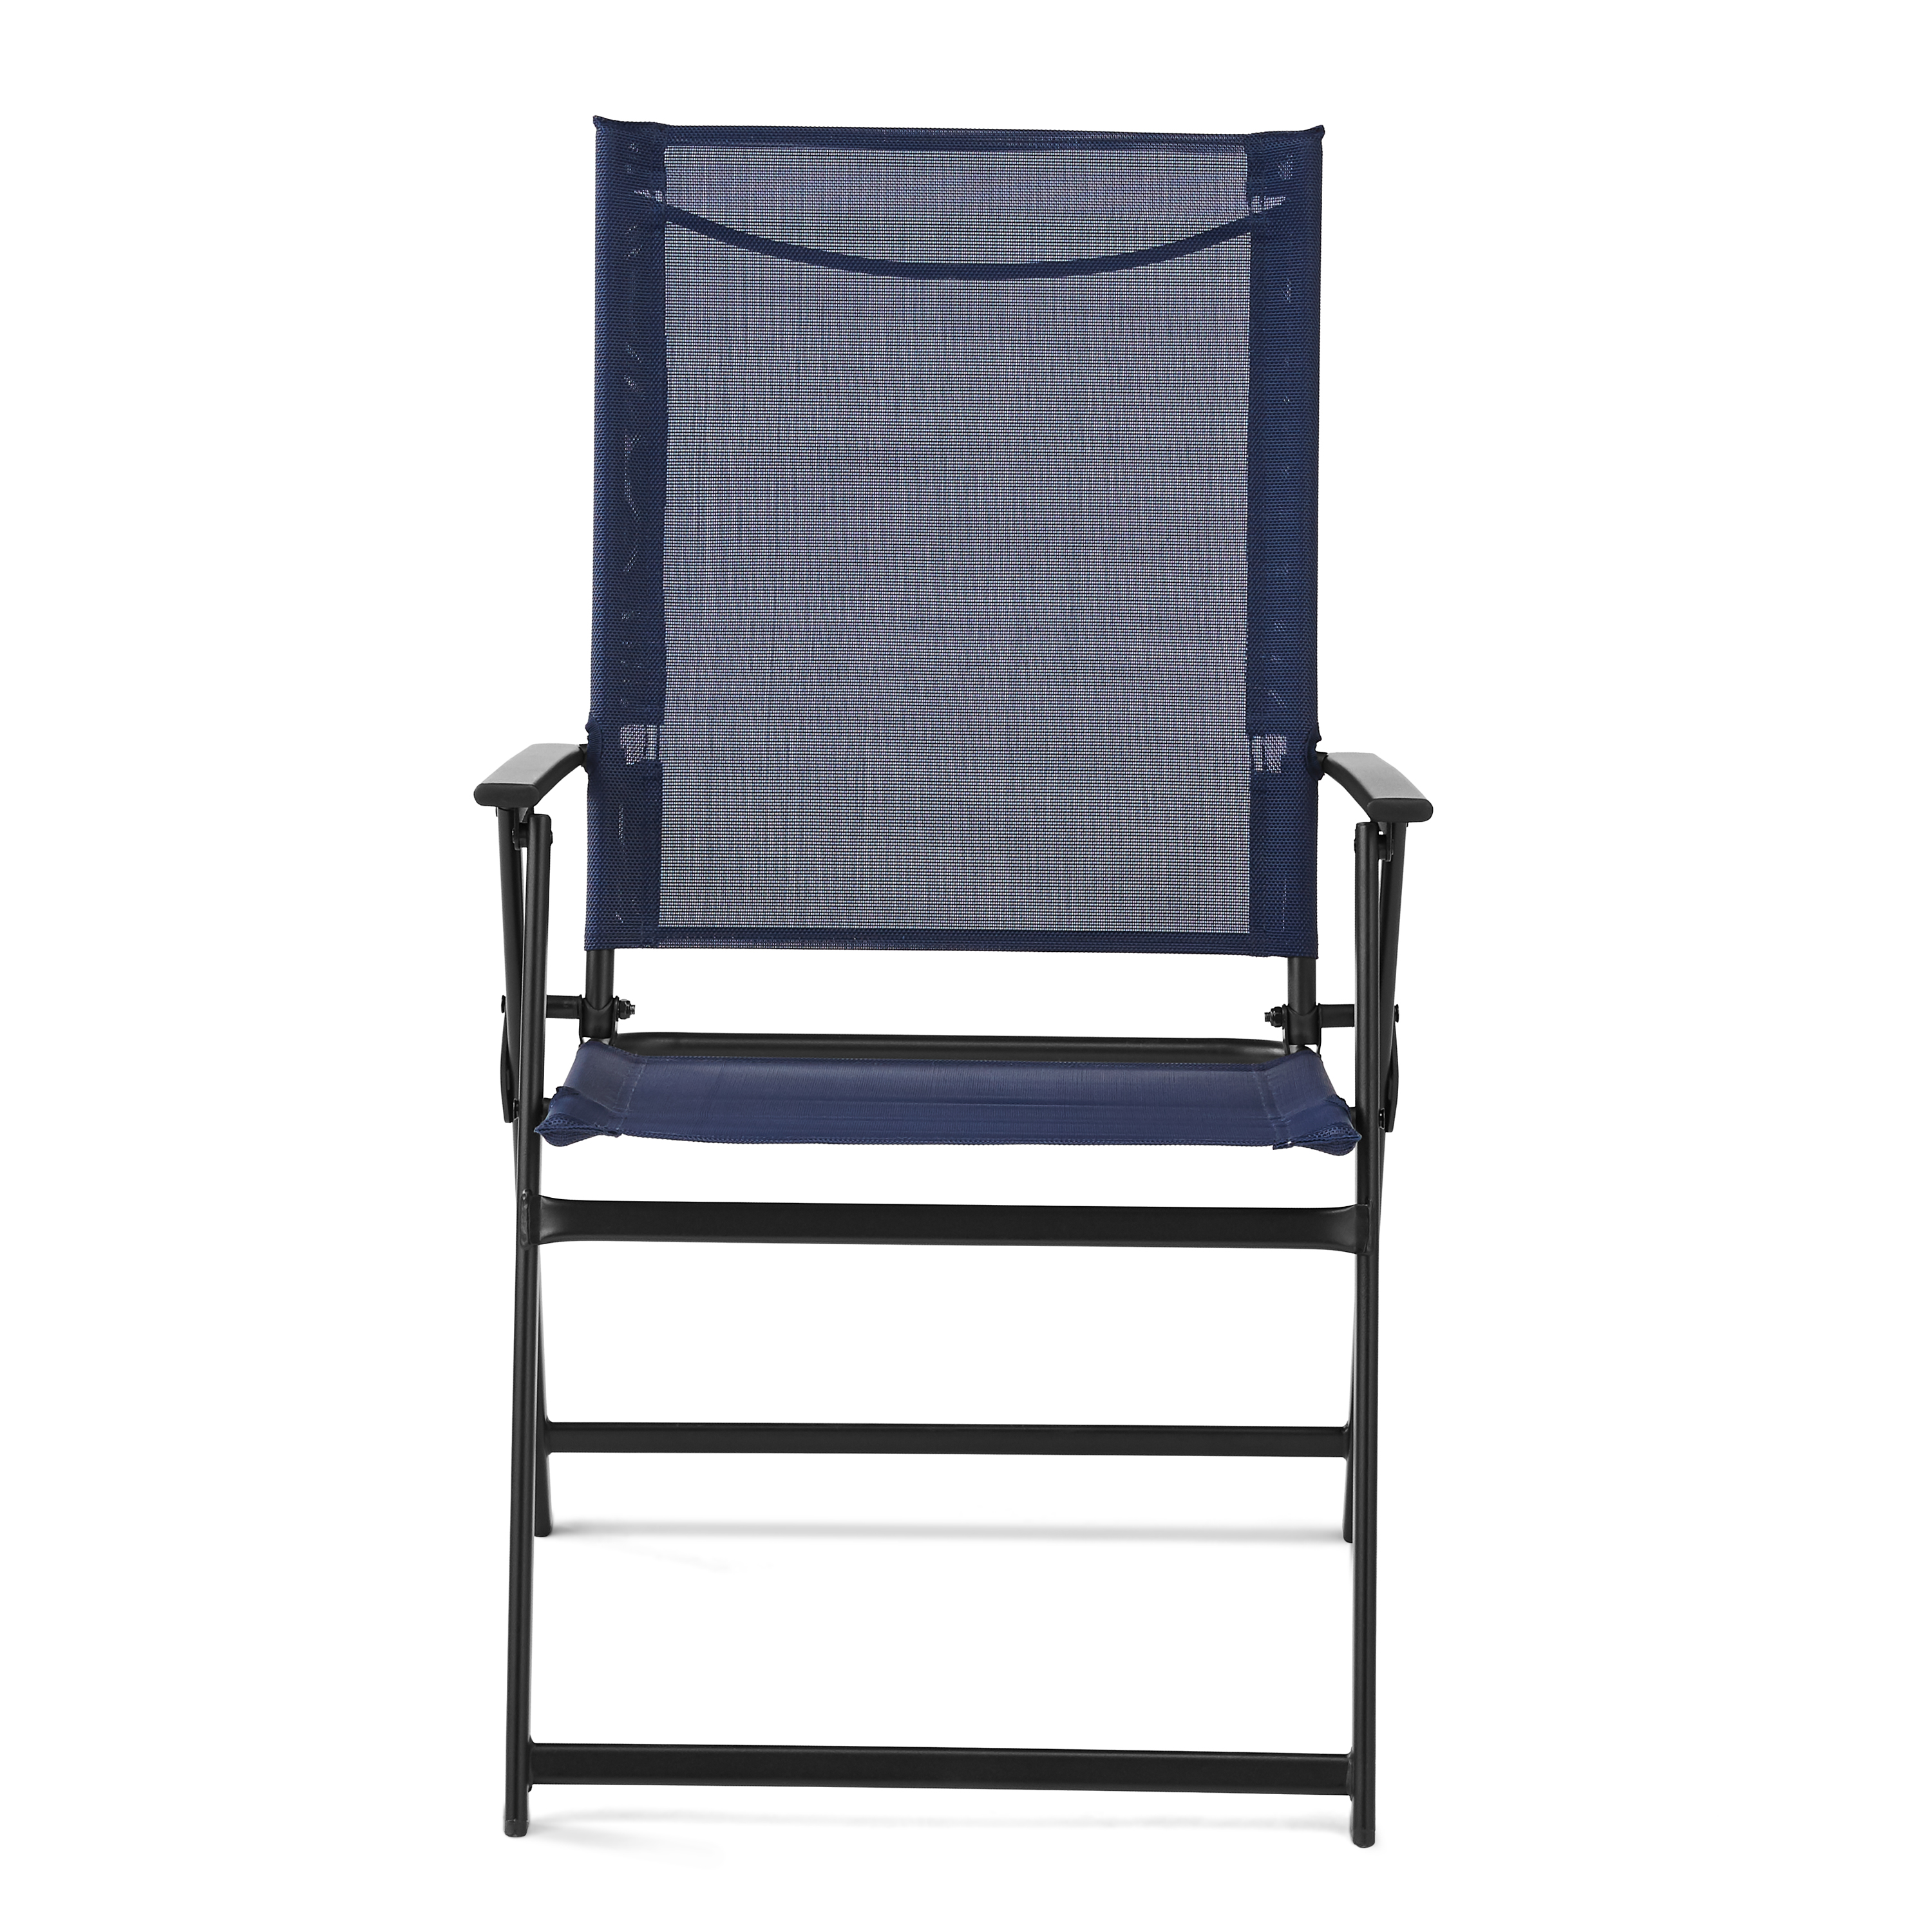 Mainstays Greyson Steel and Sling Adult Folding Outdoor Patio Armchair, Navy (Set of 2) - image 1 of 8